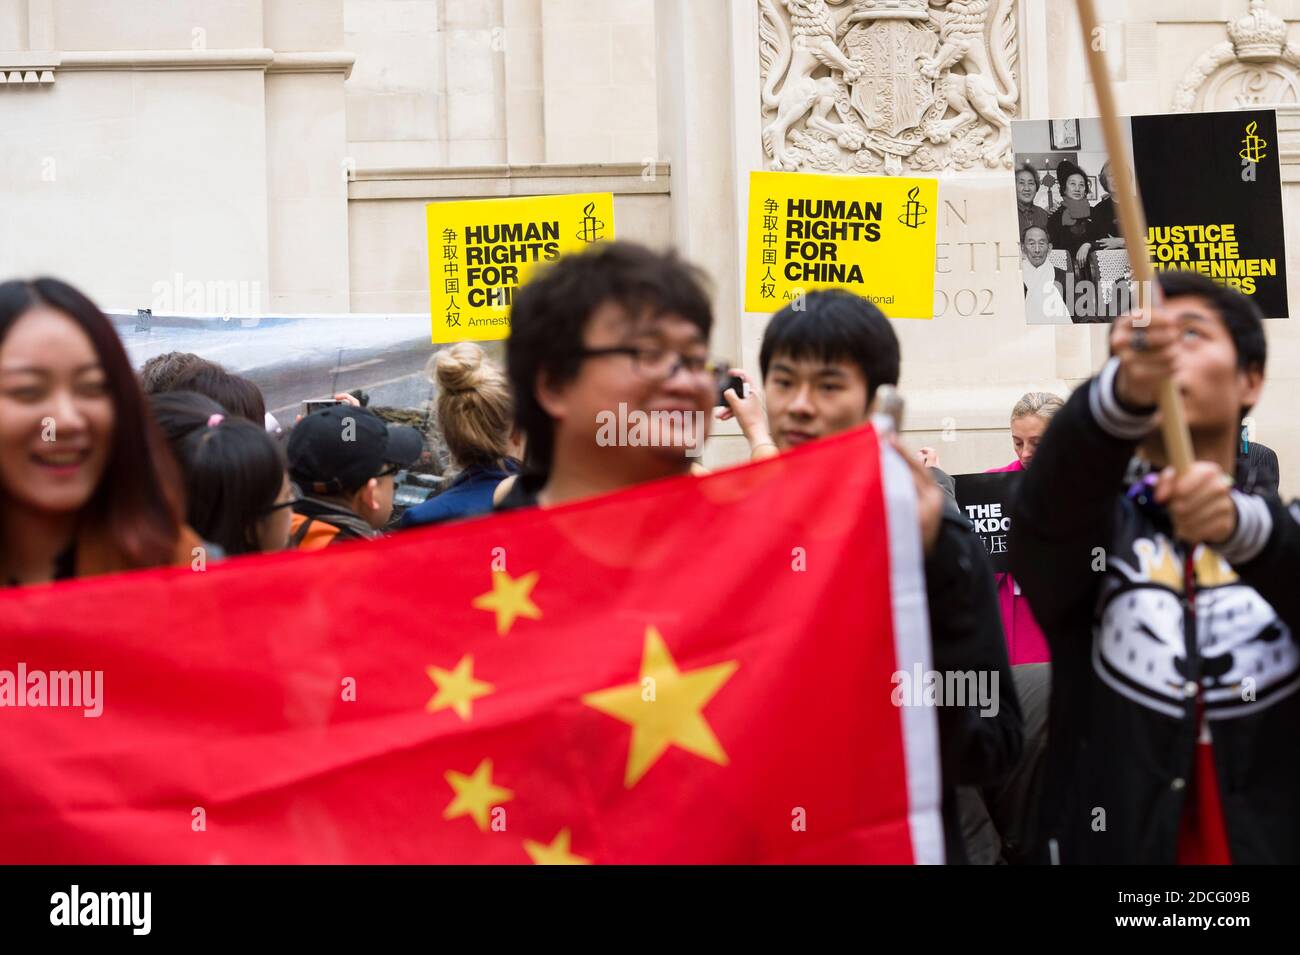 Human rights protest highlighting China’s human rights issues on the first day of the Chinese President Xi Jinping state visit to Britain. The Mall, Saint Jame's Park, Westminster, London, UK.  20 Oct 2015 Stock Photo